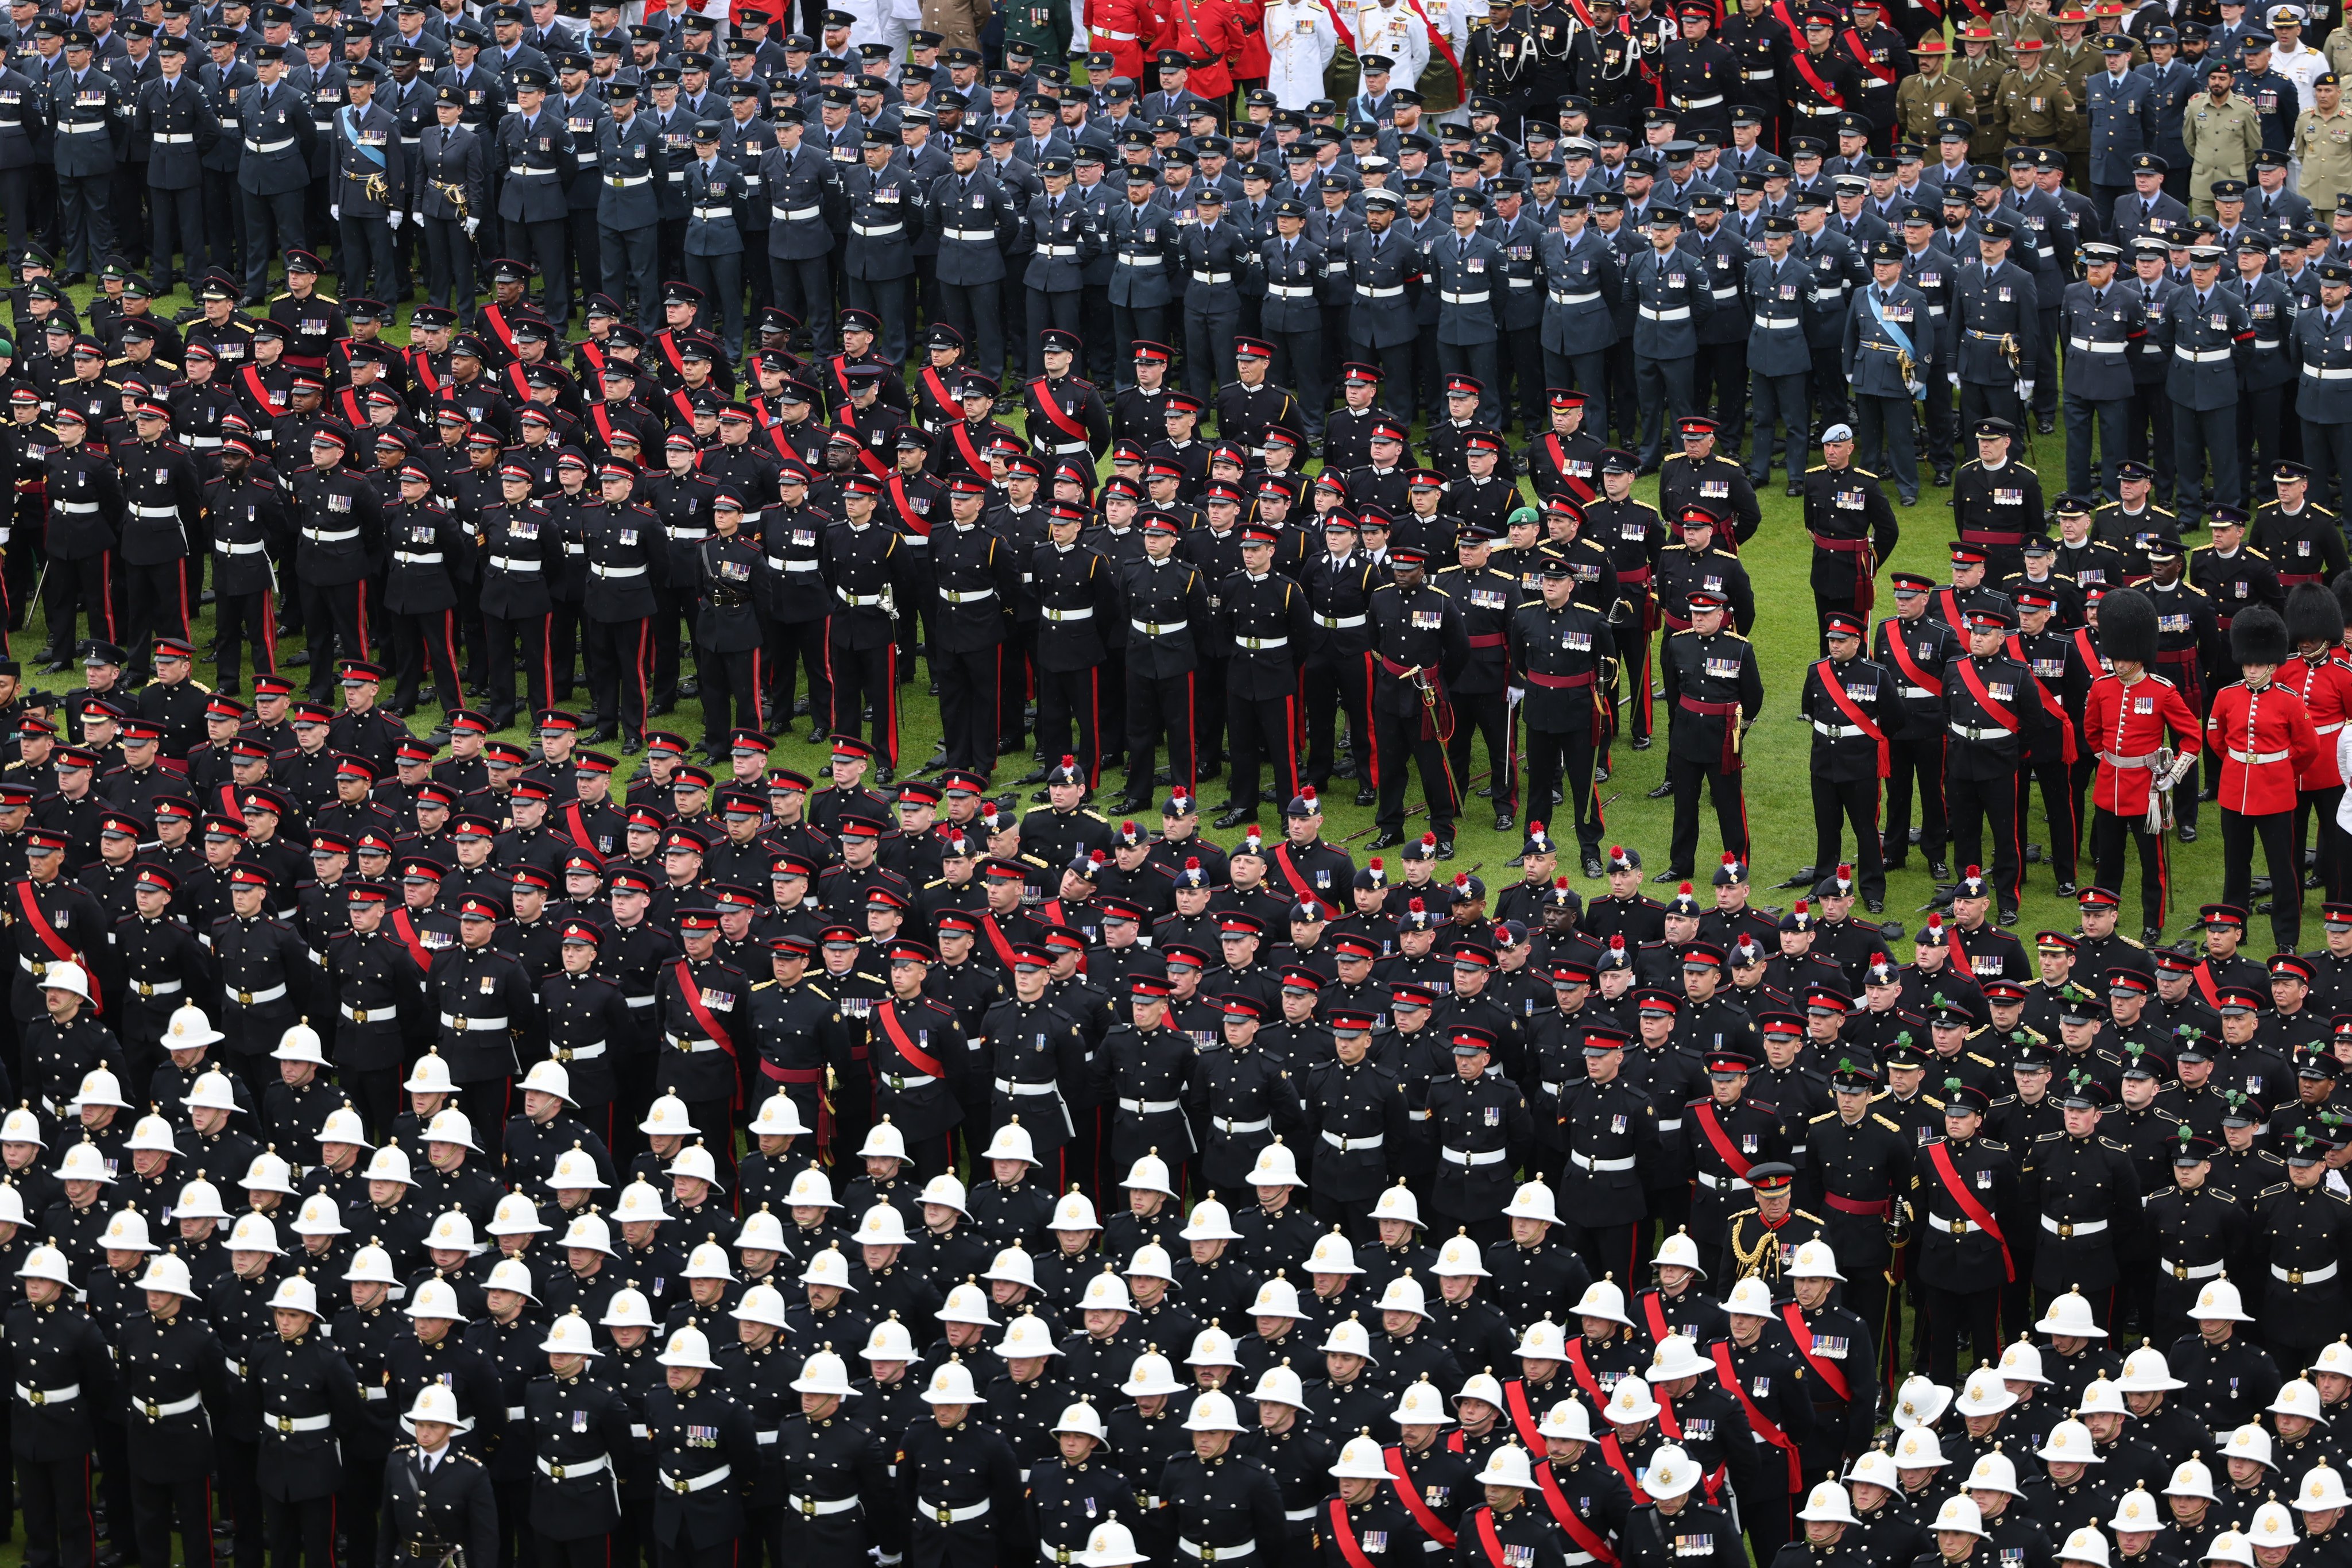 Rows of uniformed members of the Armed Forces assembled in the garden of Buckingham Palace on the day of the Coronation.